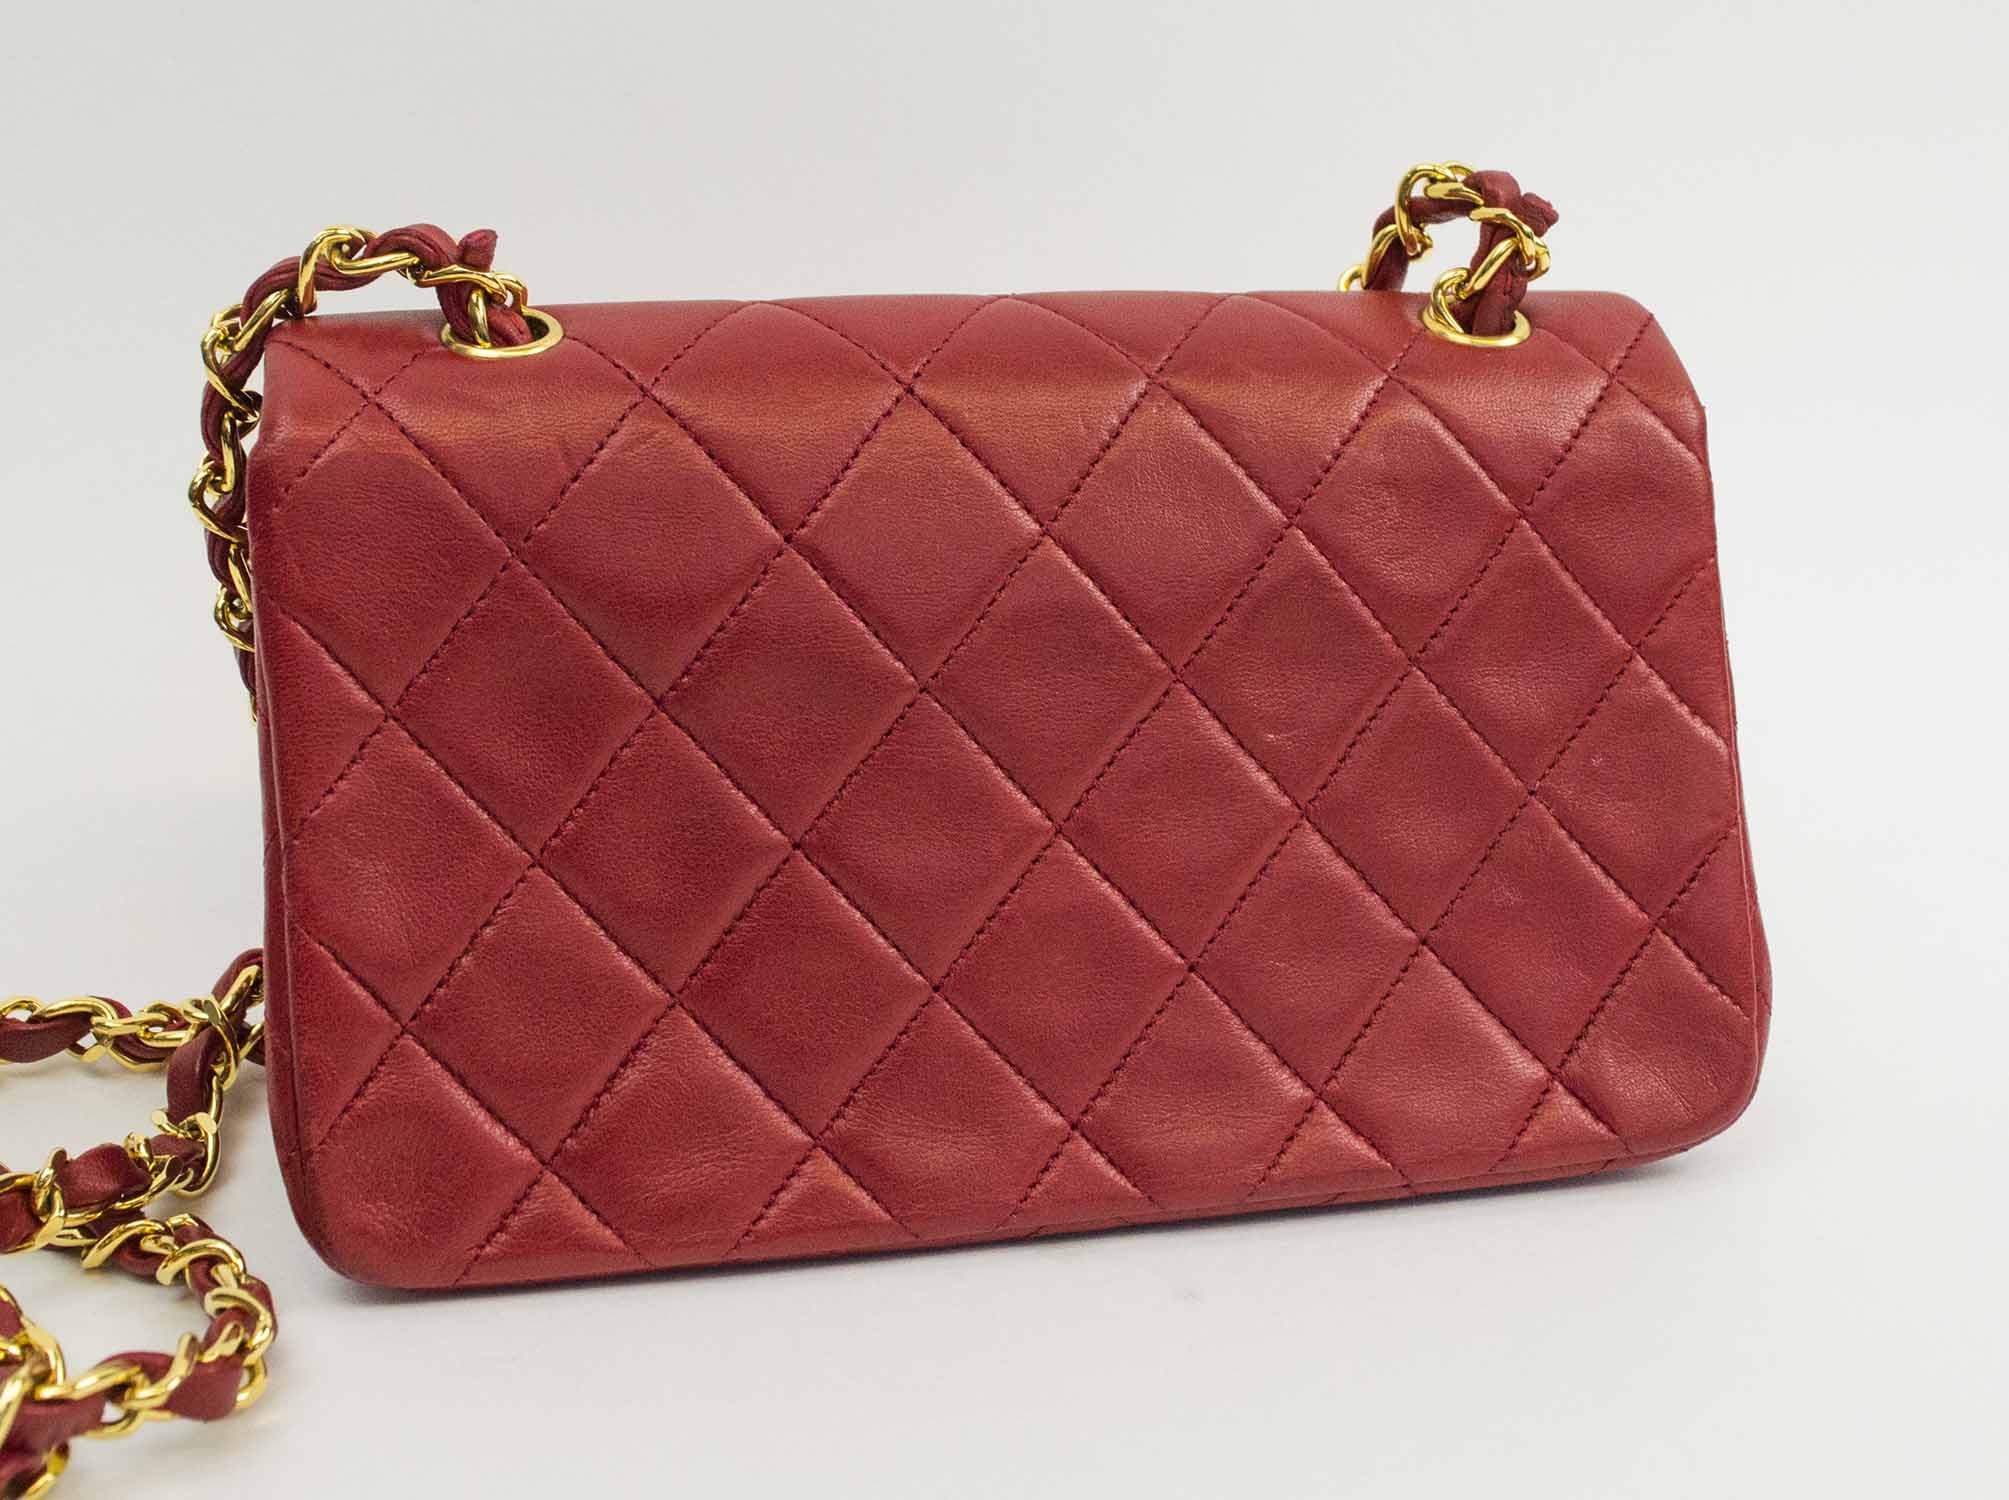 CHANEL MINI FLAP BAG, quilted red leather with gold tone hardware